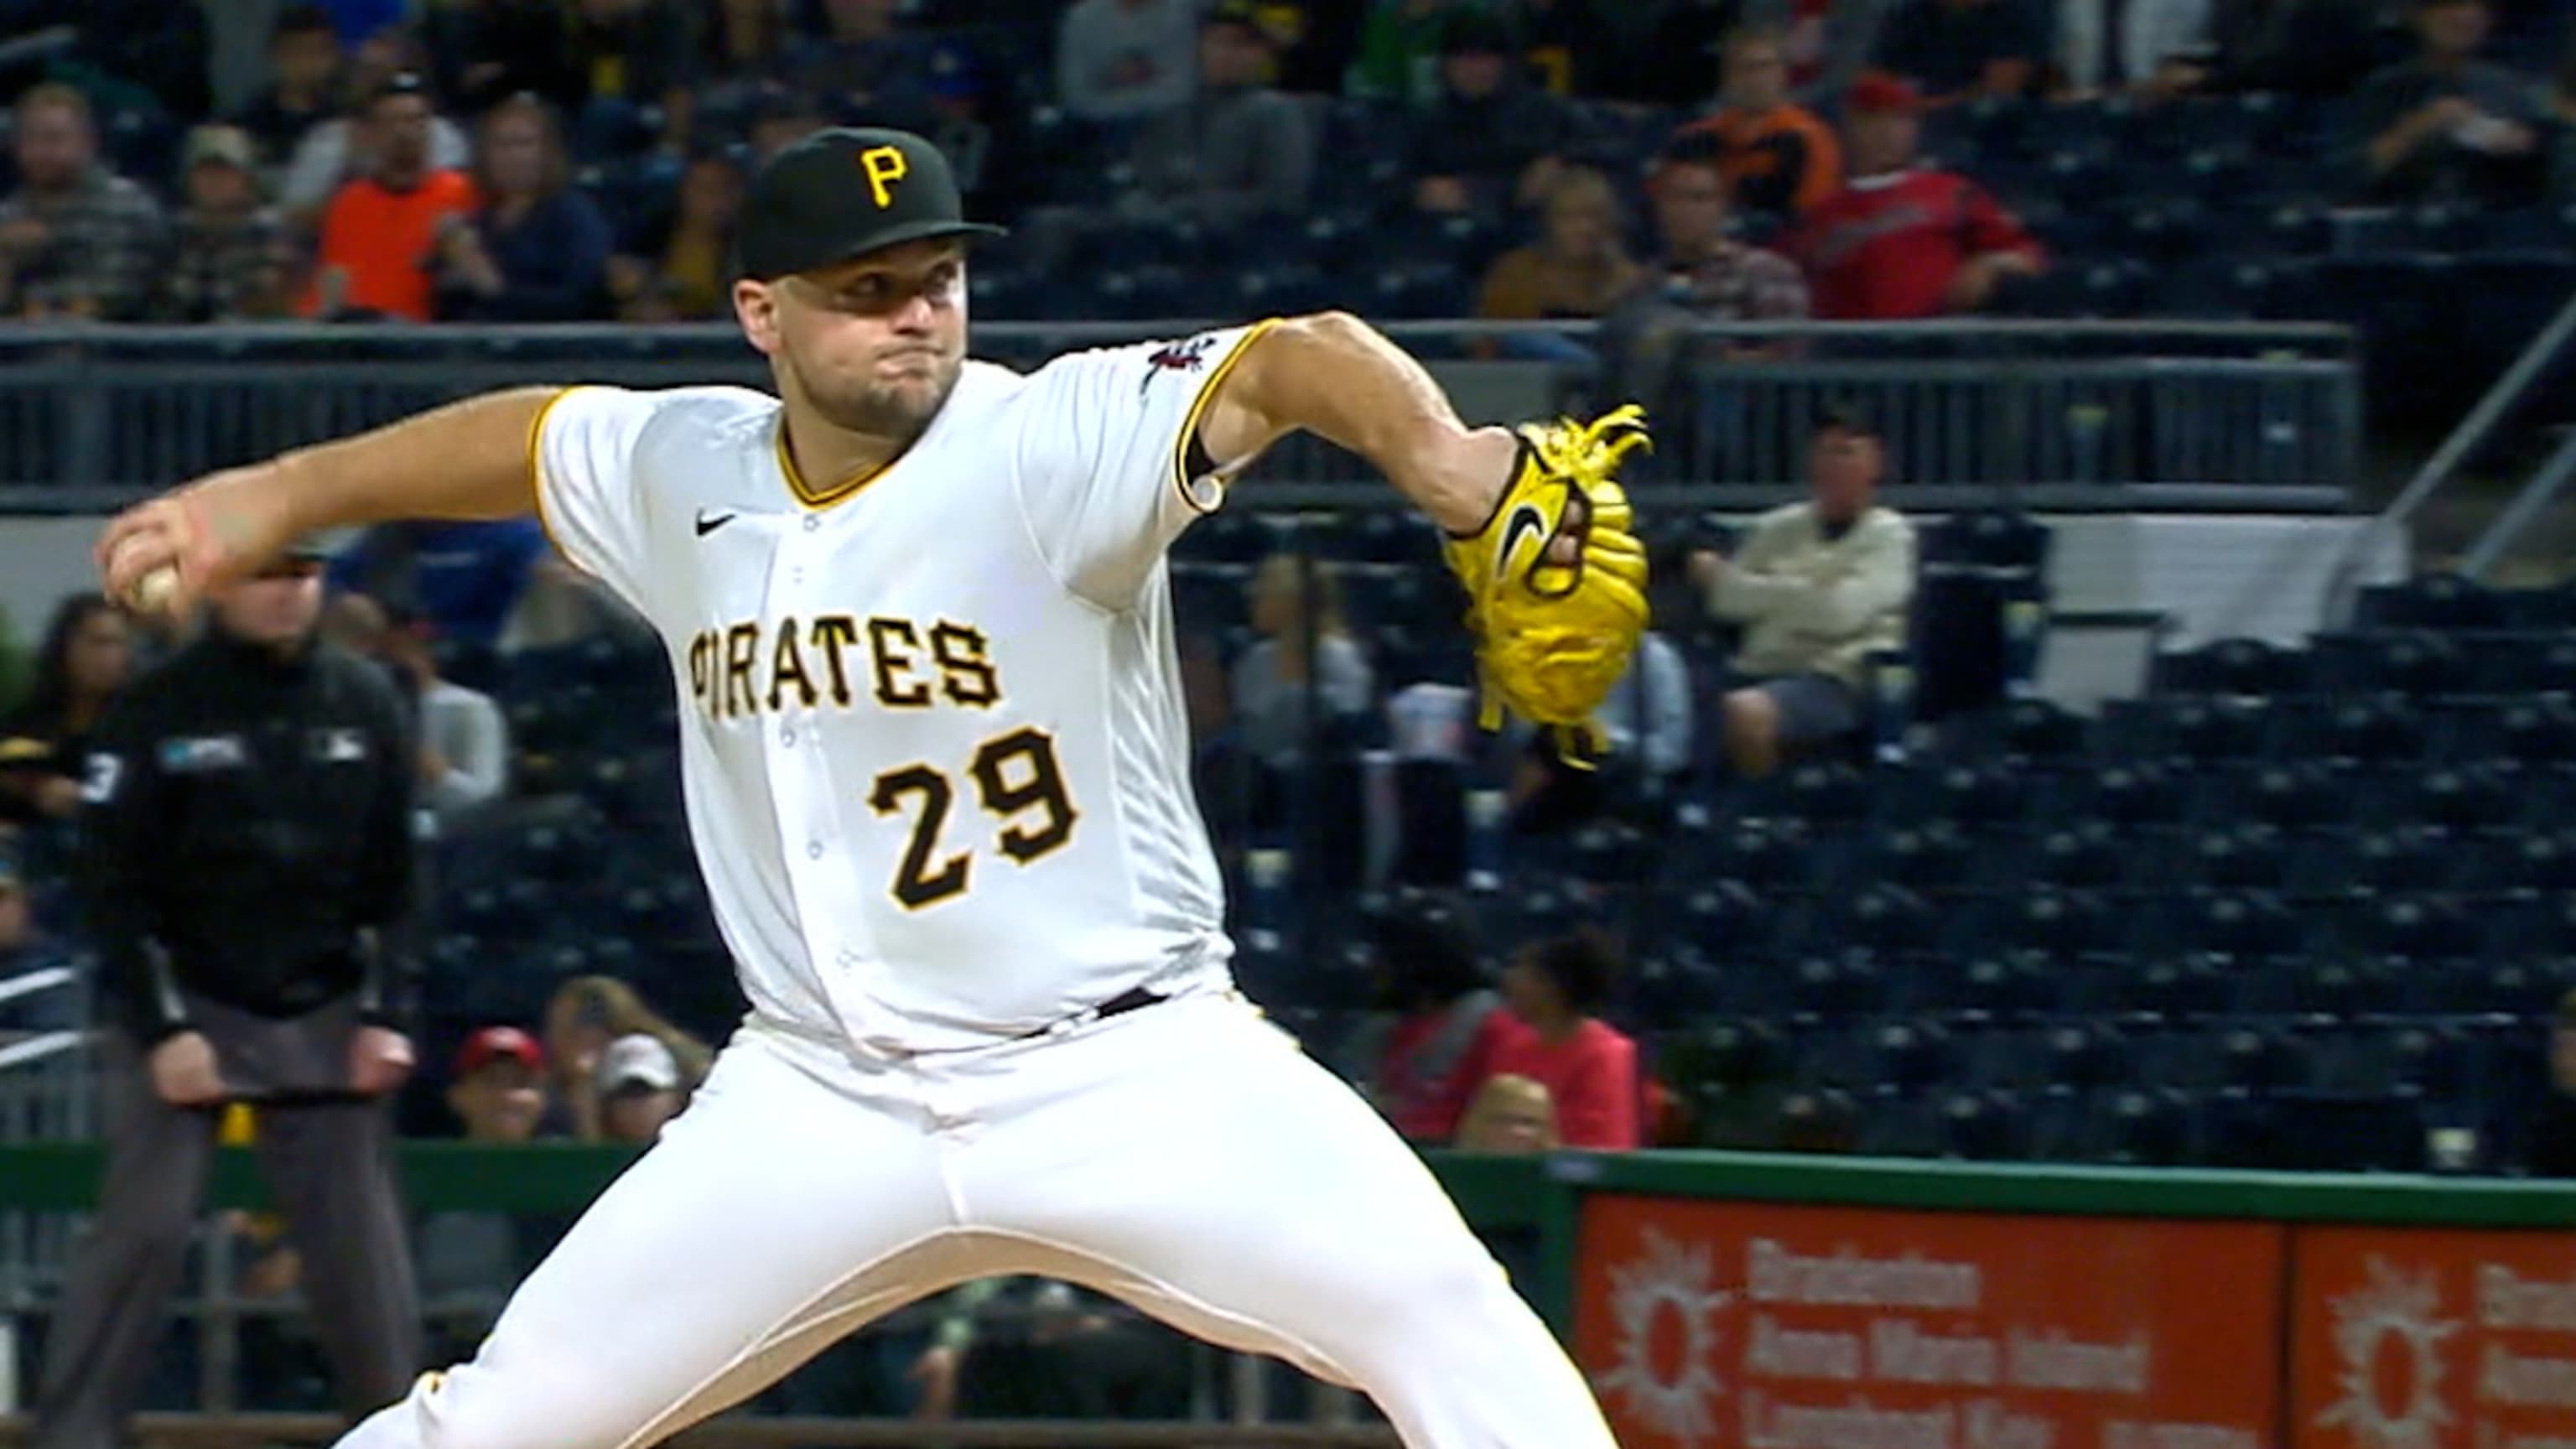 Big League Debut: Cole Tucker, Pittsburgh Pirates — Prospects Live